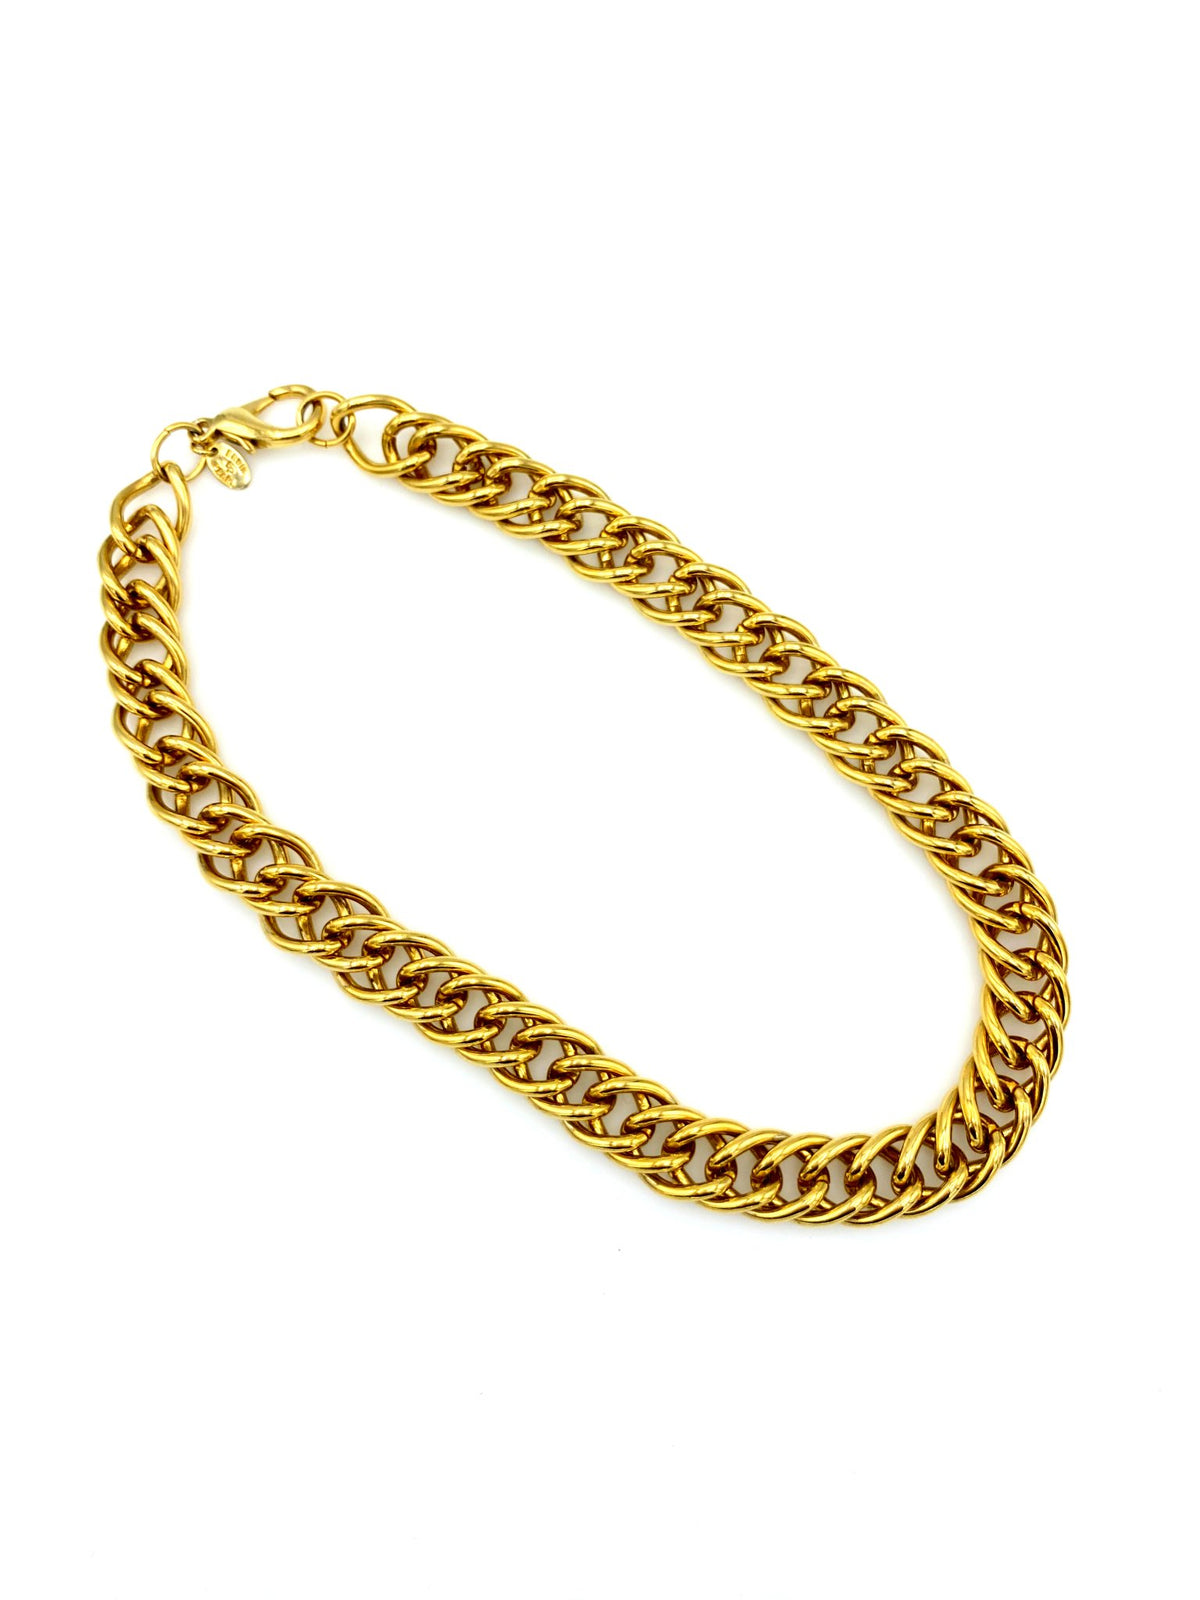 Vintage Heavy Link Gold Curb Chain Necklace - 24 Wishes Vintage Jewelry